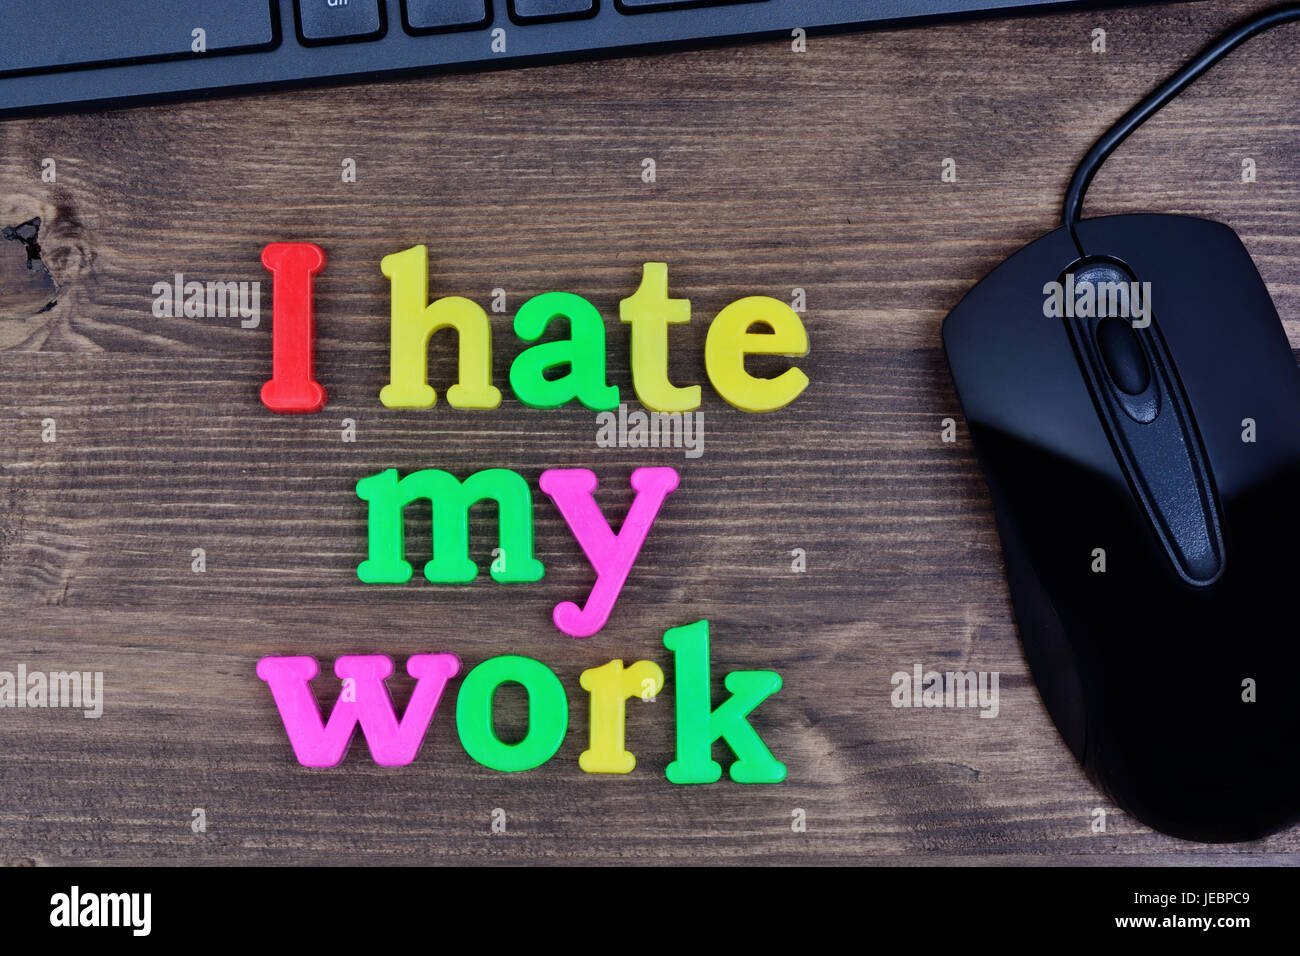 I hate my work words on wooden table Stock Photo